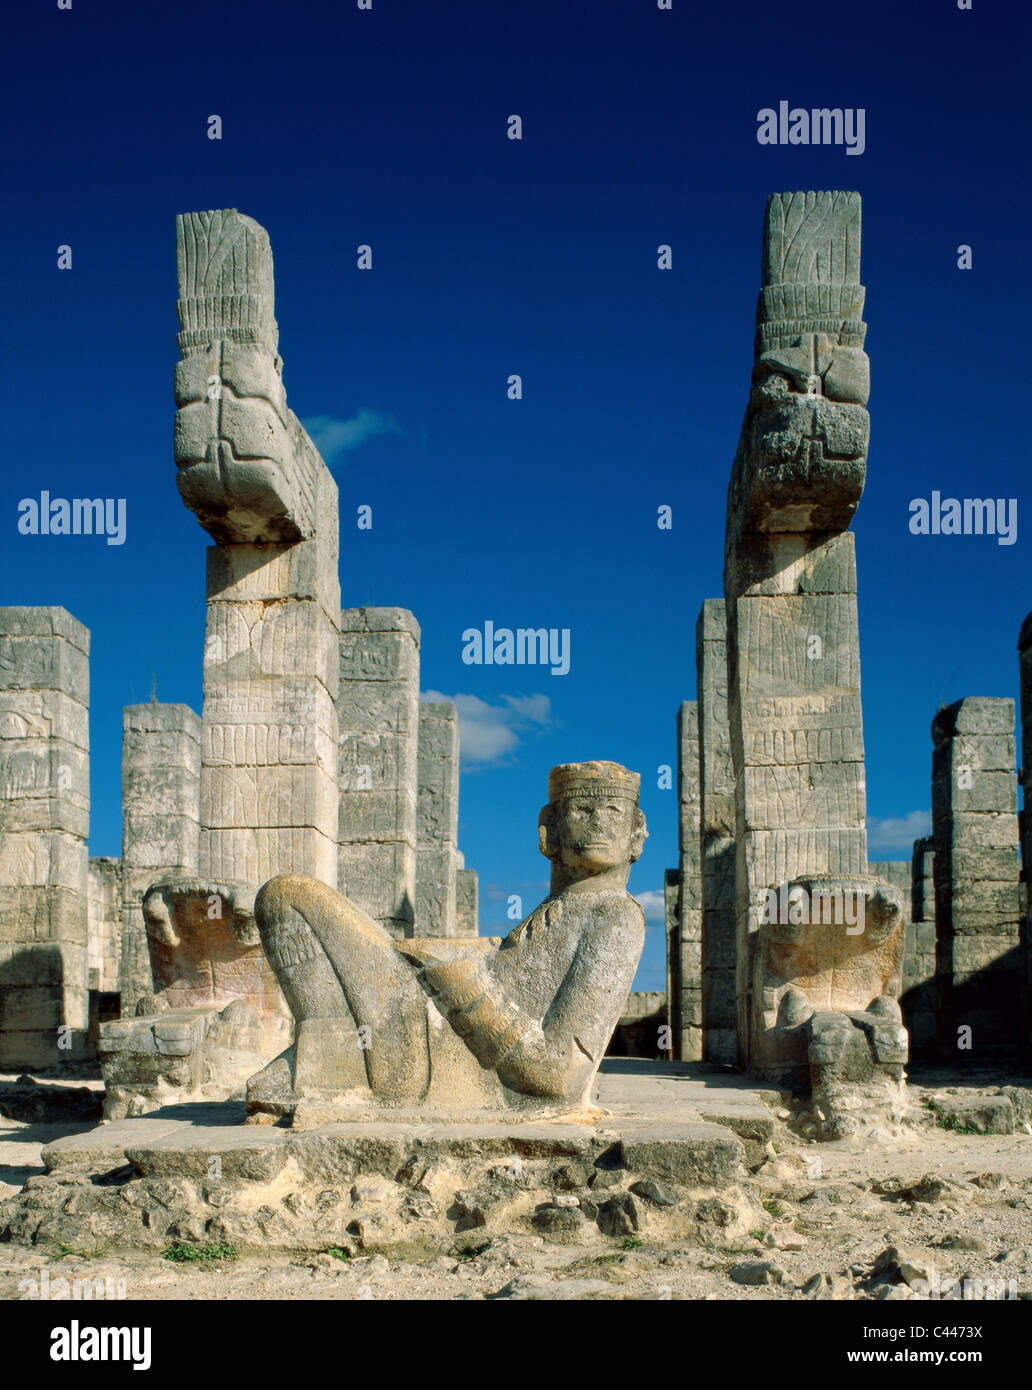 Chacmool, Chichen itza, Heritage, Holiday, Landmark, Mexico, Temple of the warriors, Tourism, Travel, Unesco, Vacation, World, Y Stock Photo